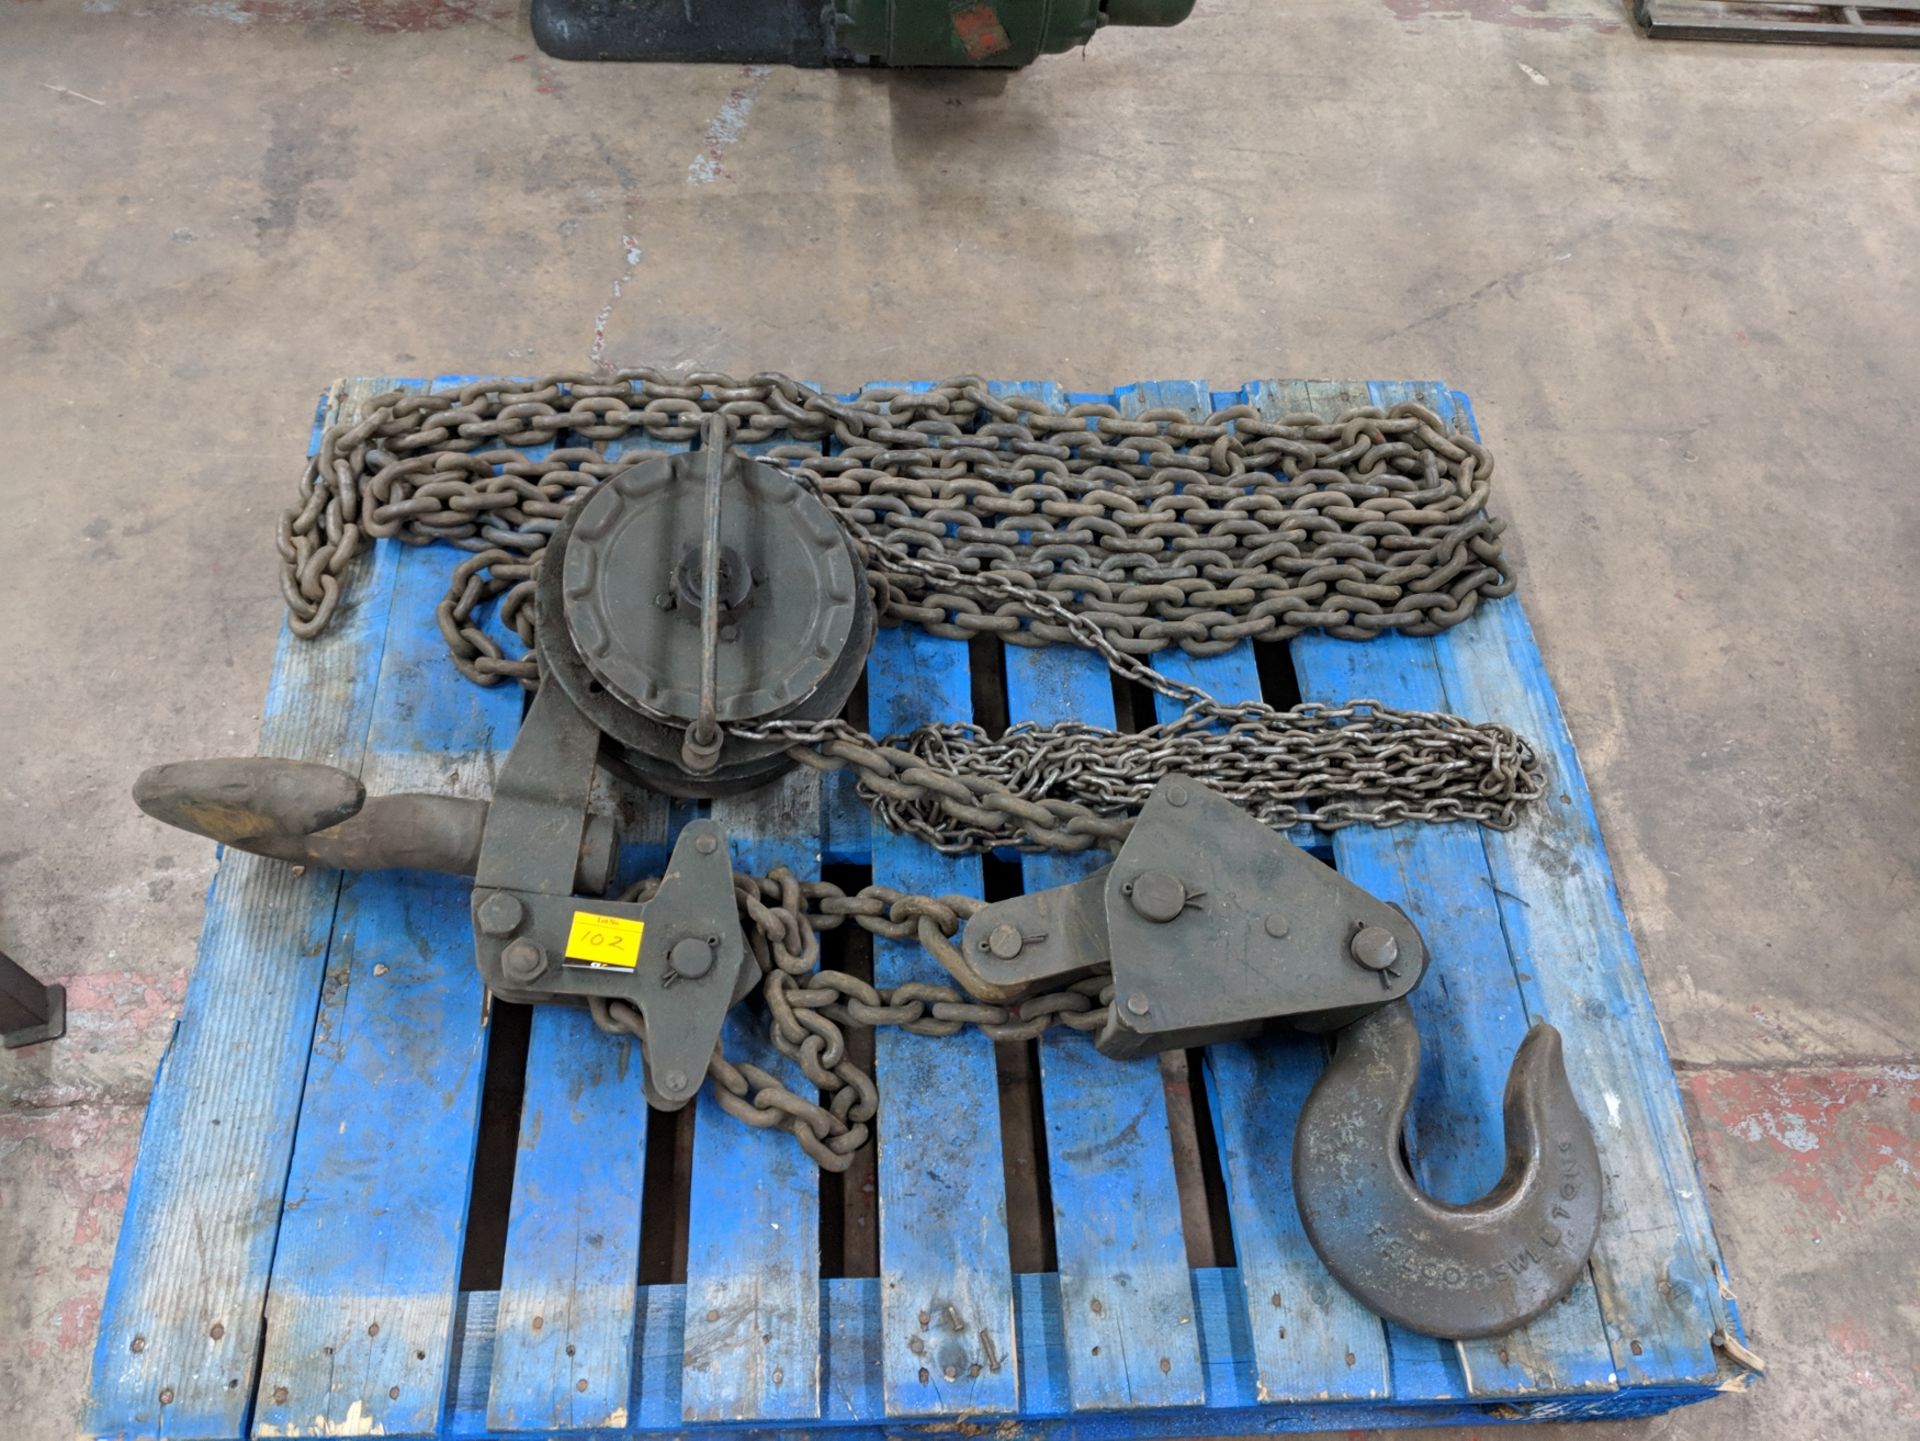 Very heavy duty lifting tackle (5 ton) comprising the contents of the palletLots 96 - 155 consist of